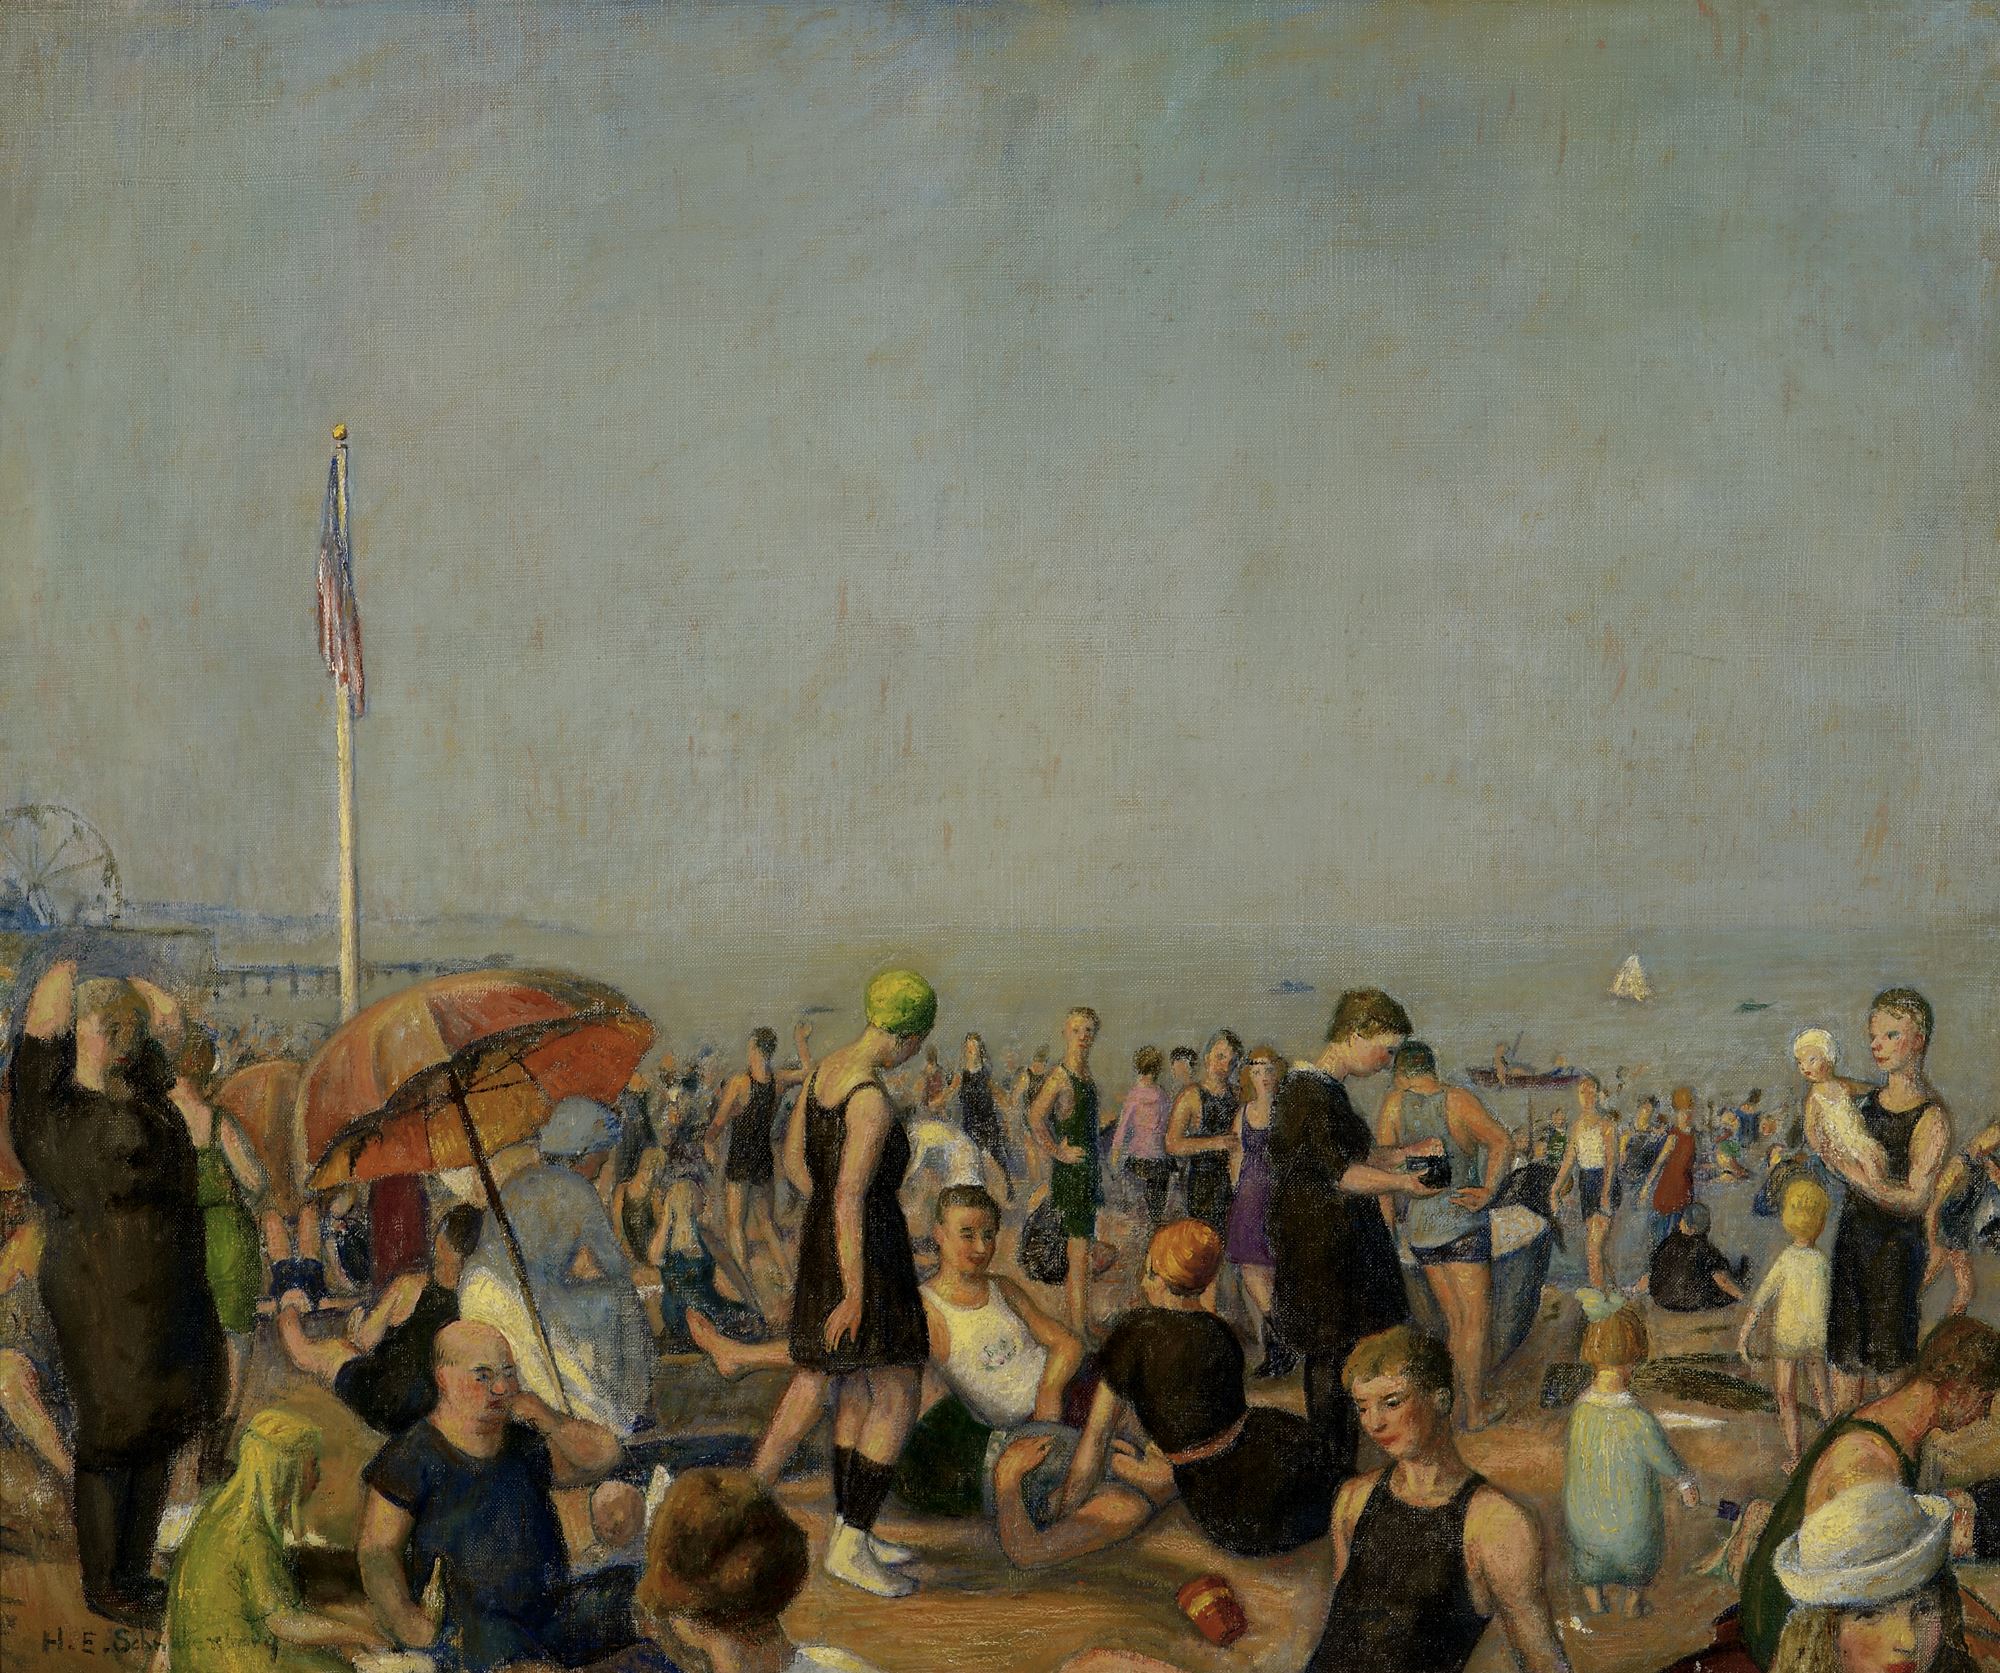 <p>Henry Schnakenberg, <i>South Beach, Staten Island</i>. Oil on canvas, 30 x 36 inches. Collection of the Nasher Museum of Art at Duke University.</p>
